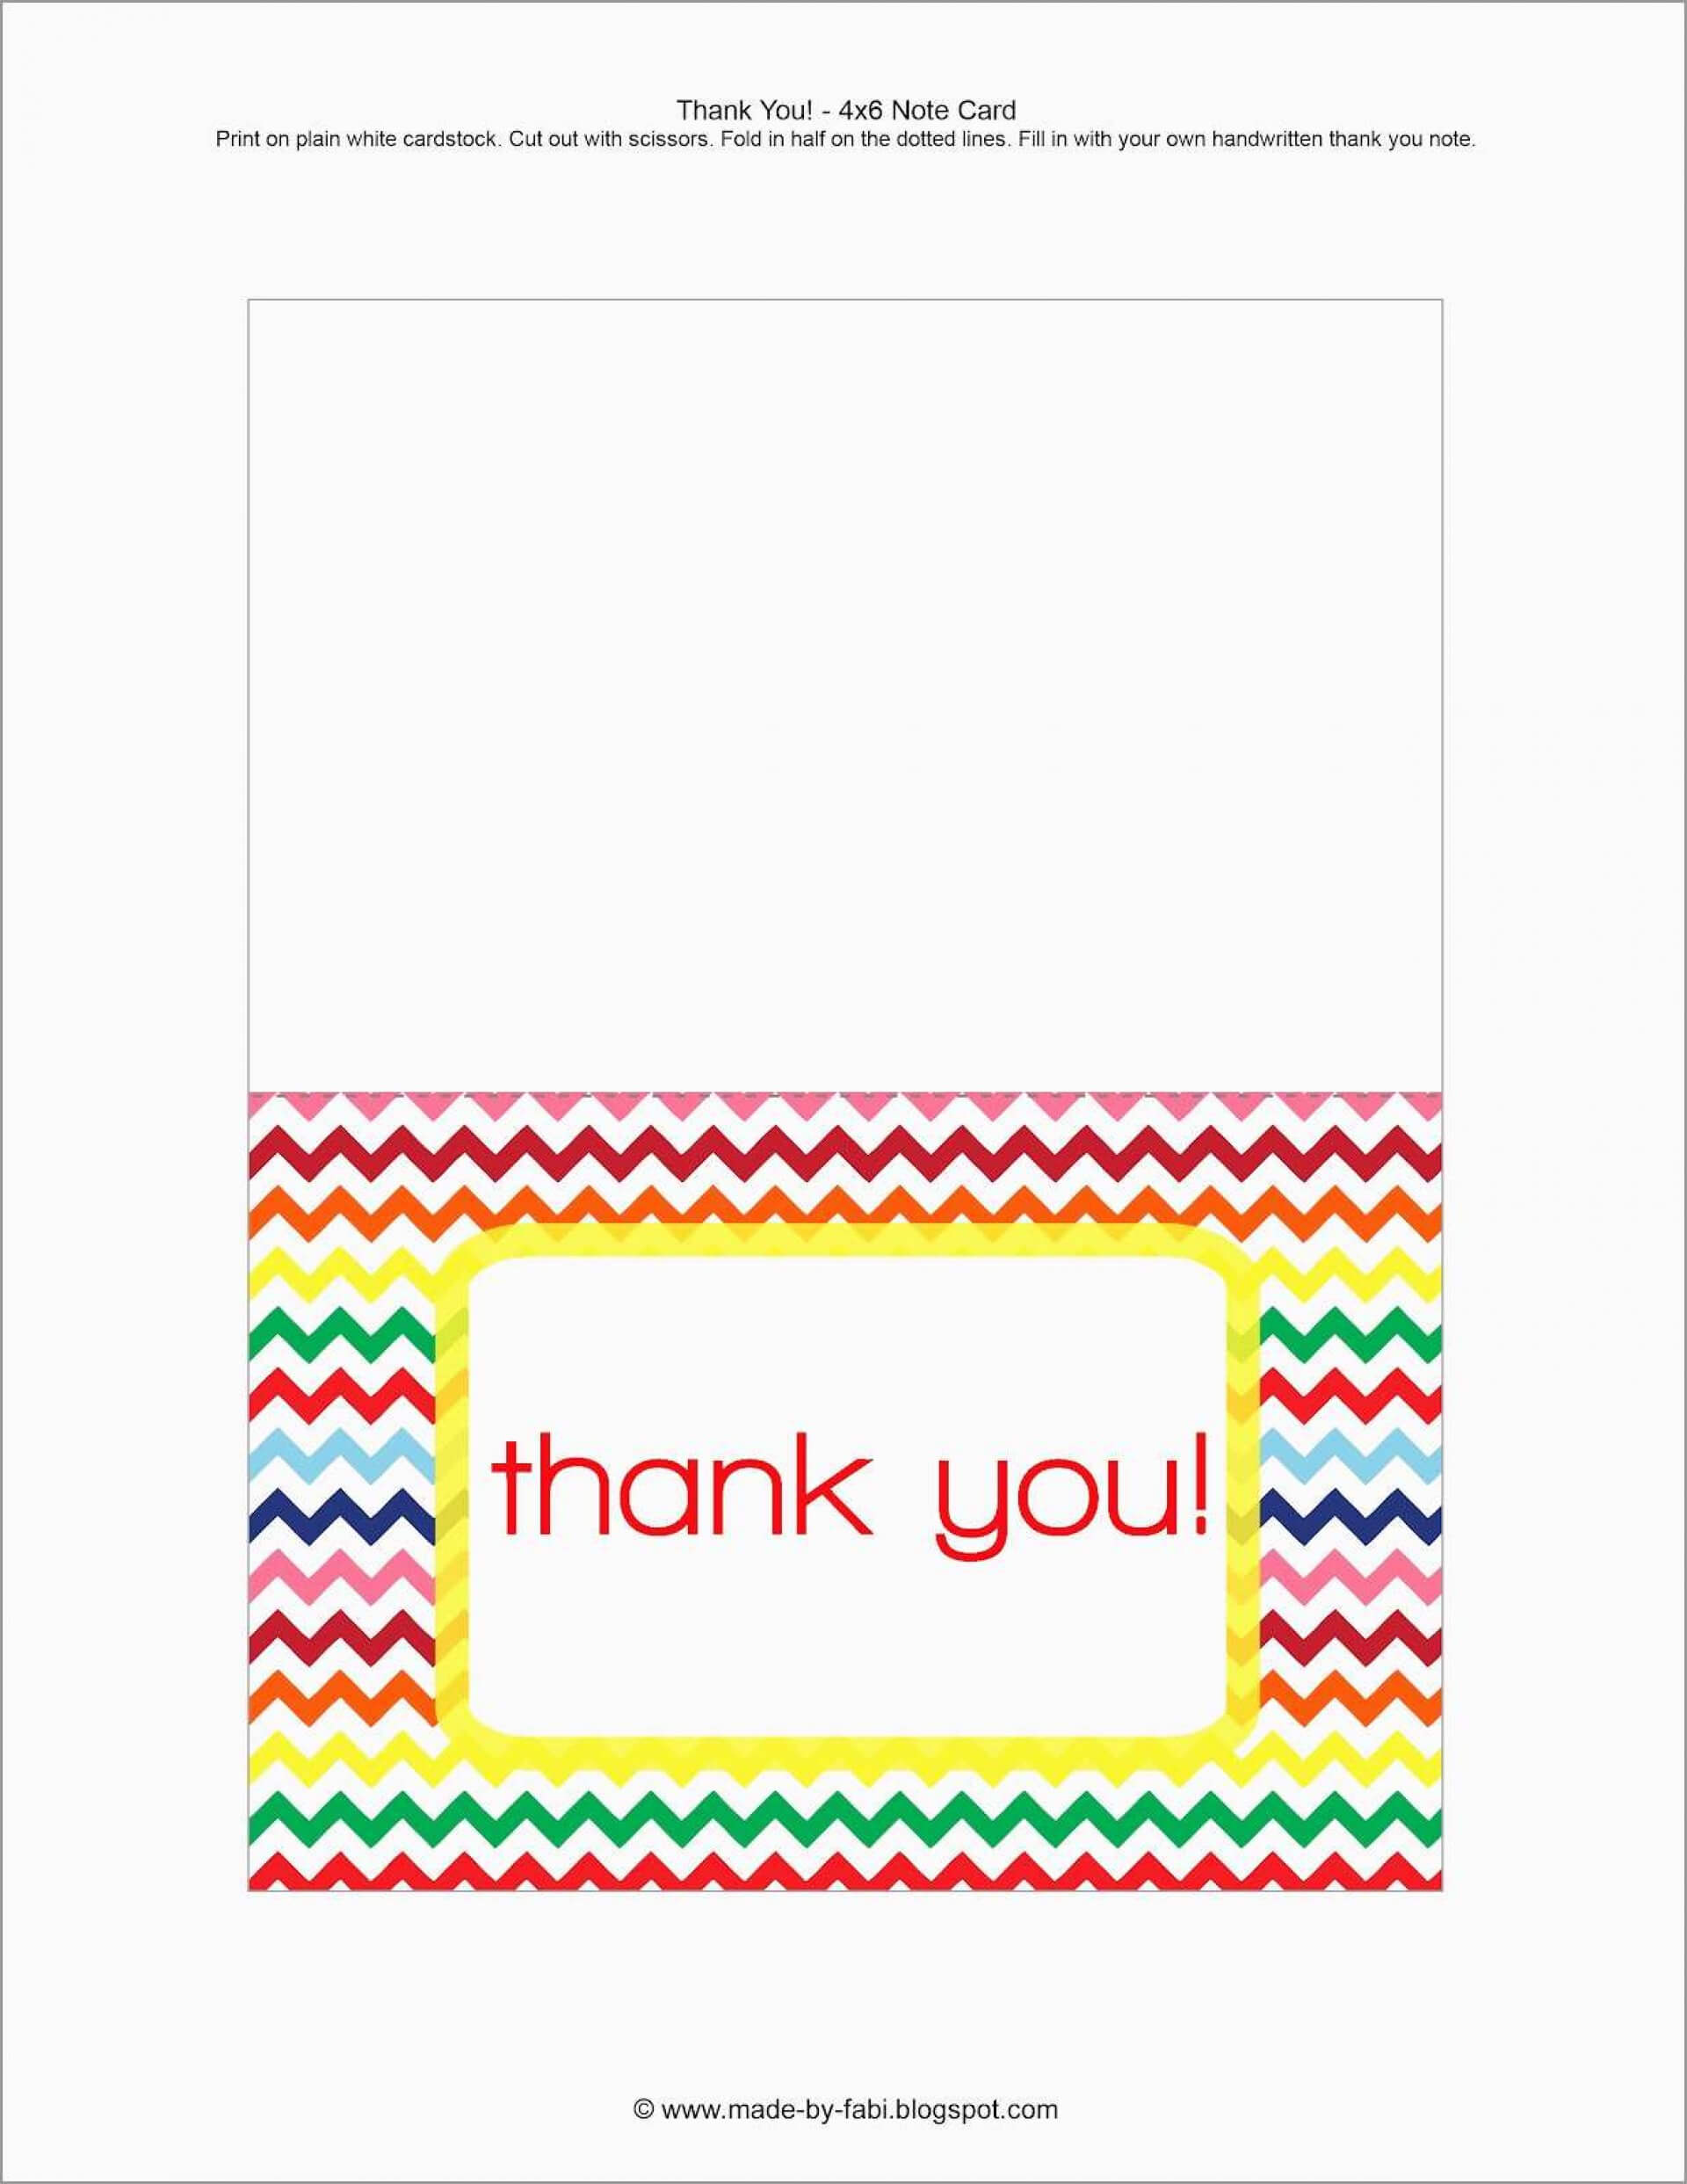 034 Screen Shot At Am 793X1024 Template Ideas Free Printable Inside Thank You Note Card Template